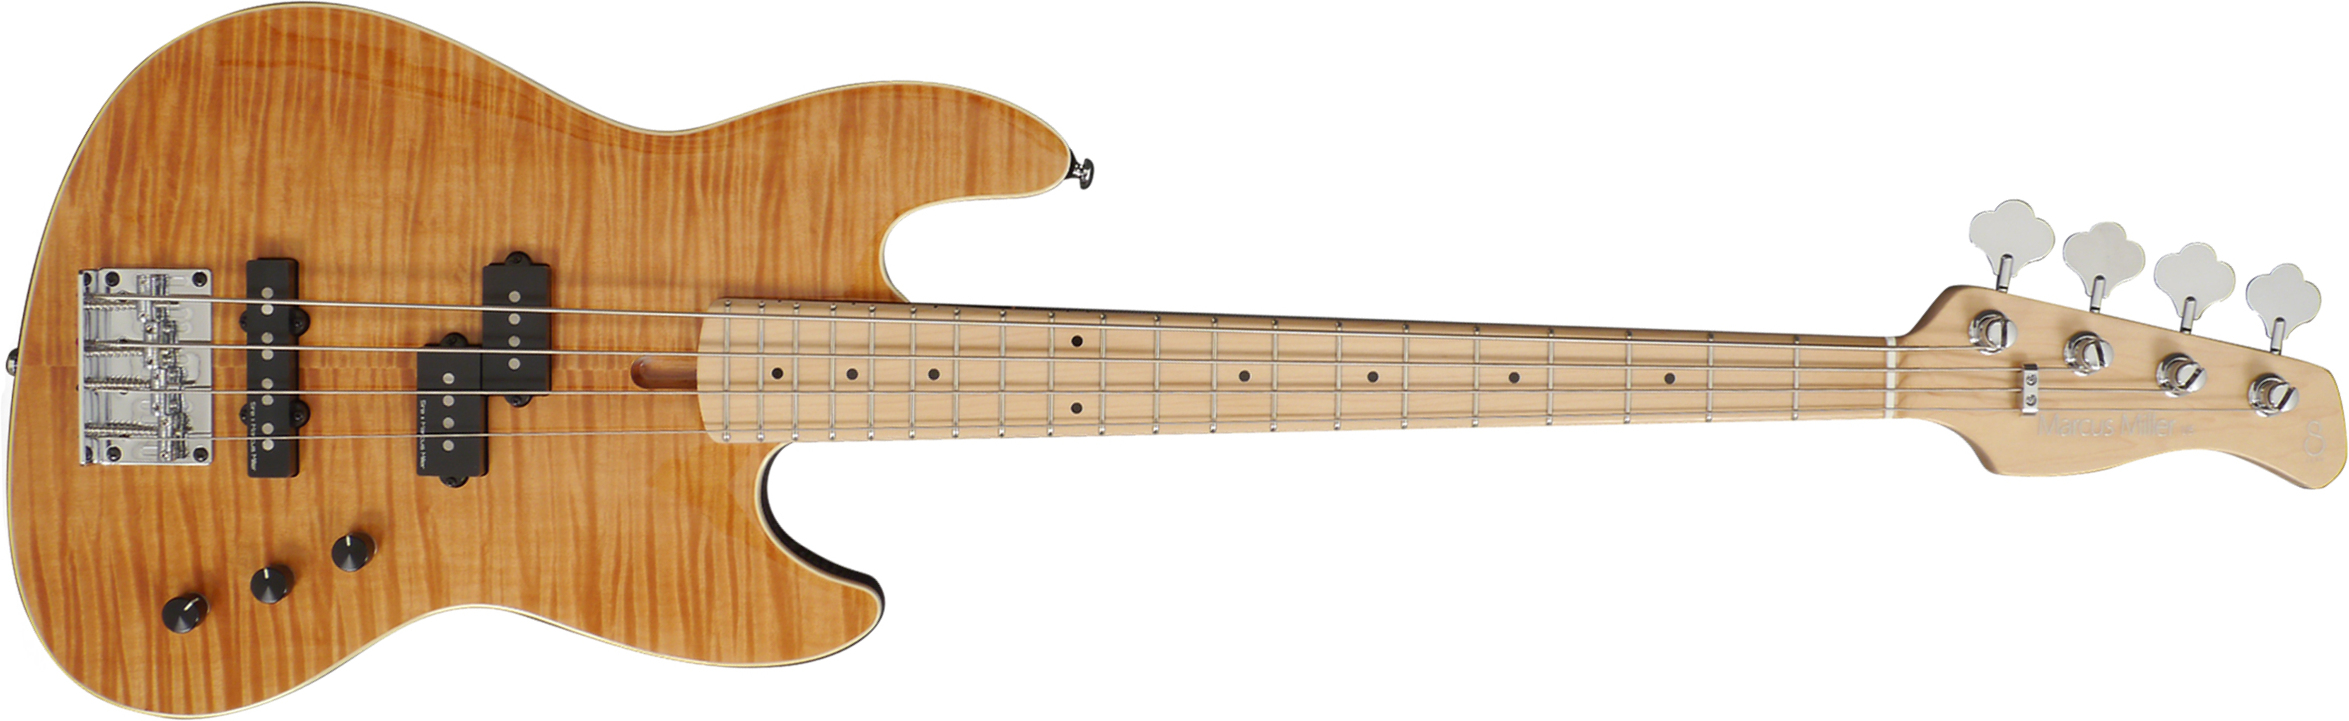 Marcus Miller U5 Alder 4st Mn - Natural - Solid body electric bass - Main picture